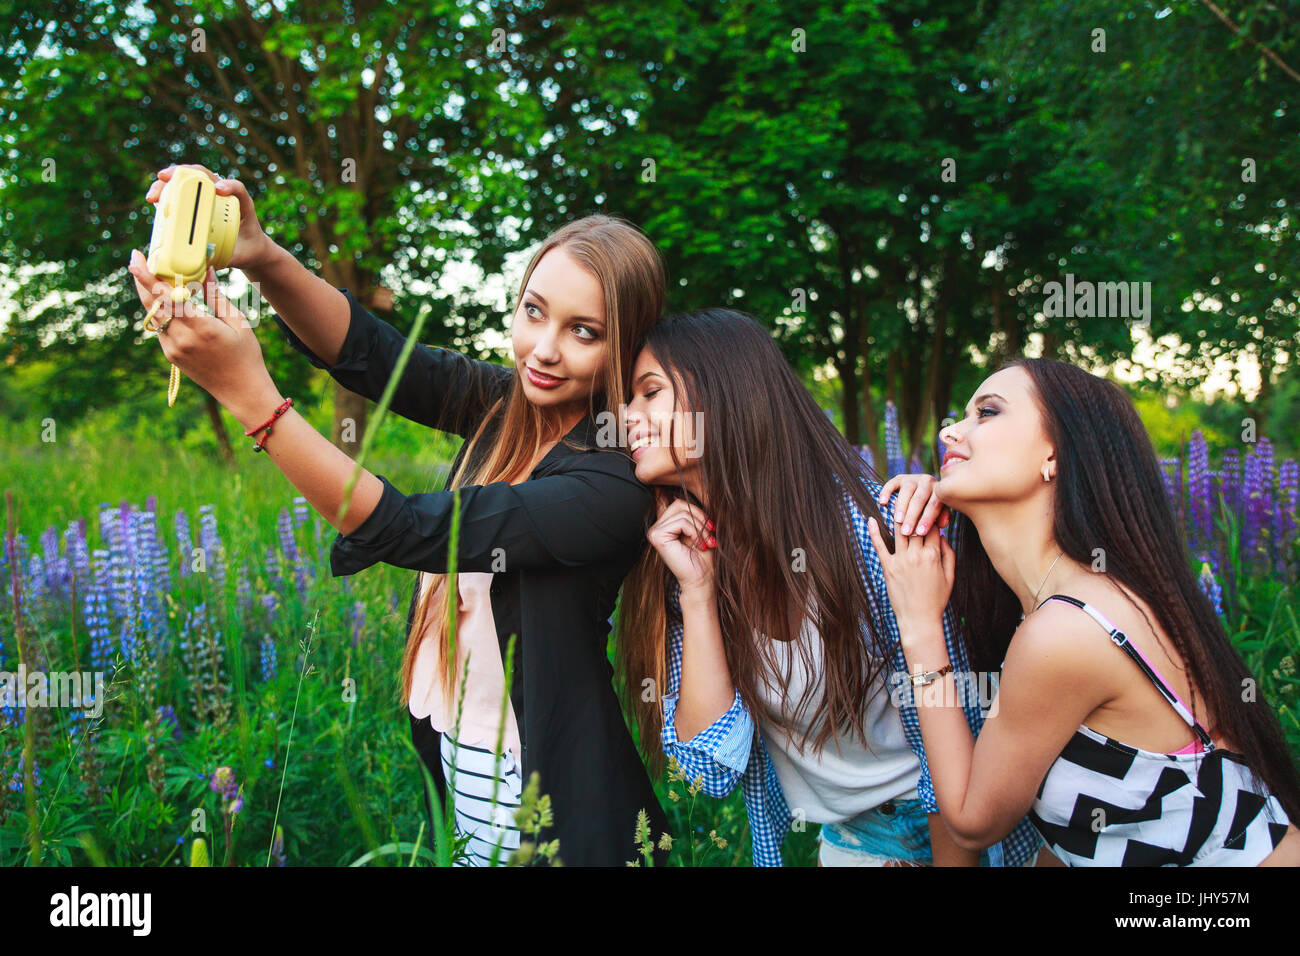 Three hipsters girls blonde and brunette taking self portrait on polaroid camera and smiling outdoor. Girls having fun together in park. Stock Photo